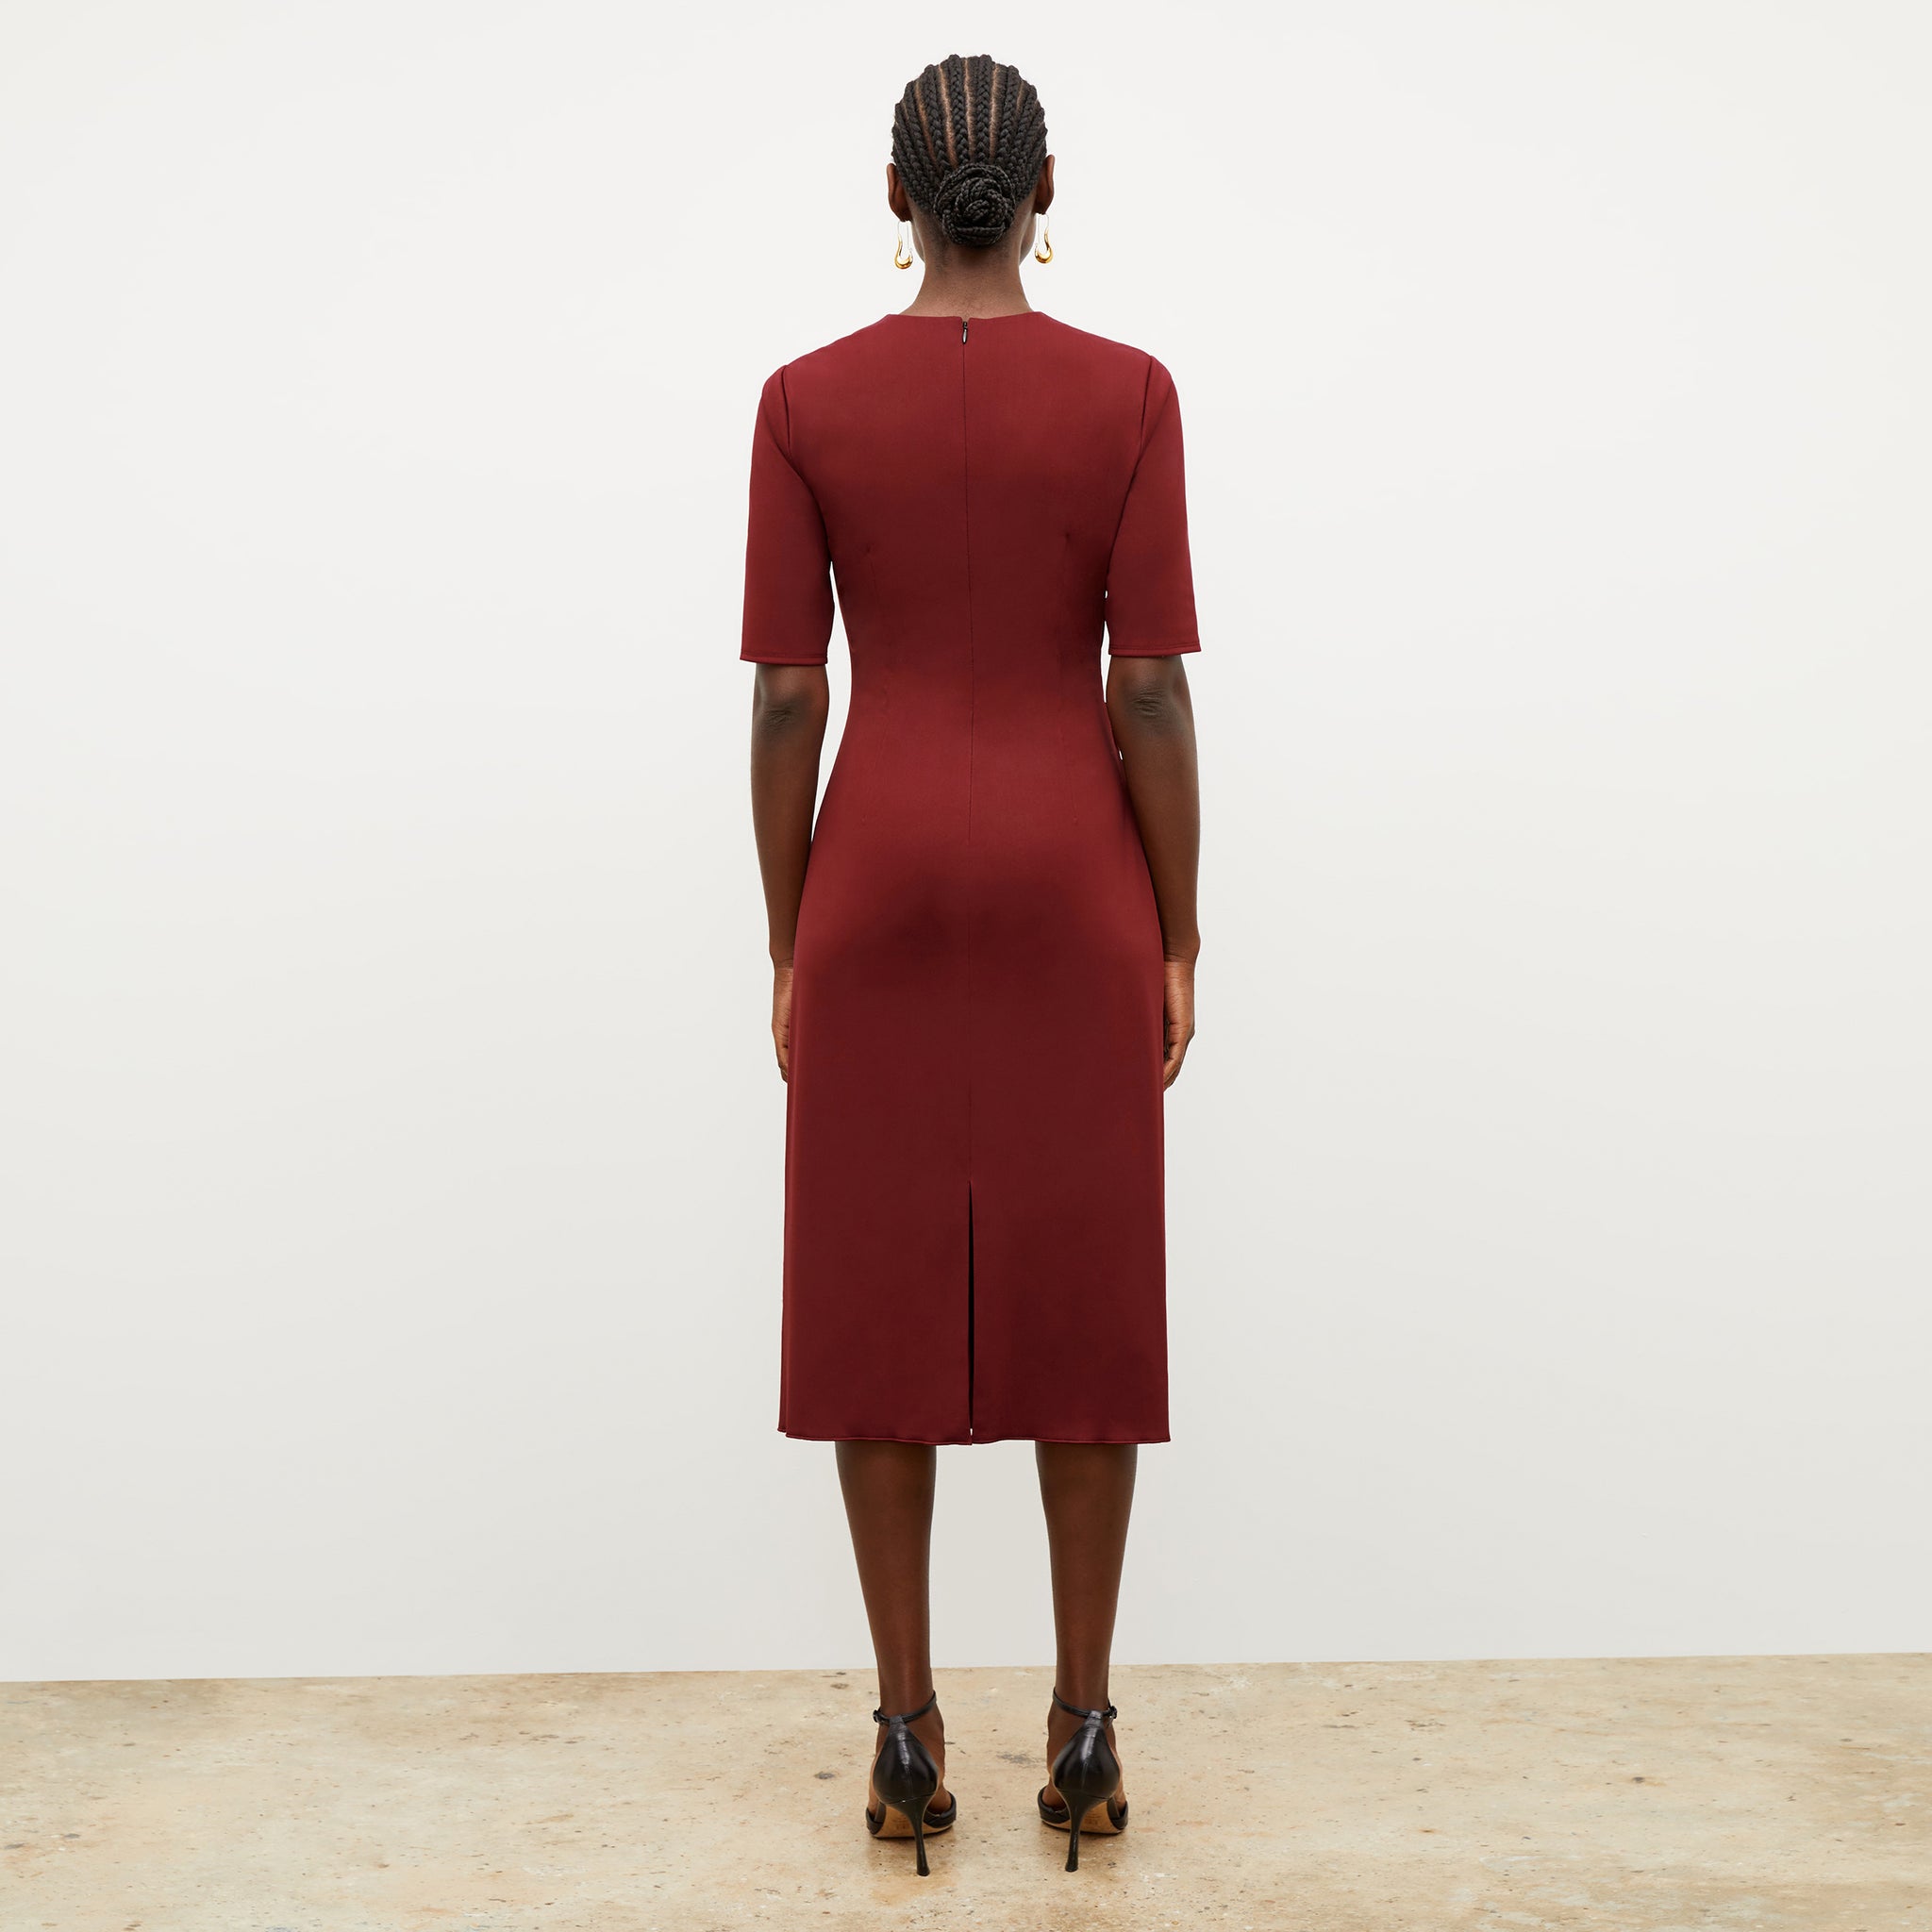 Image of a woman wearing the Ciela Dress in Maroon